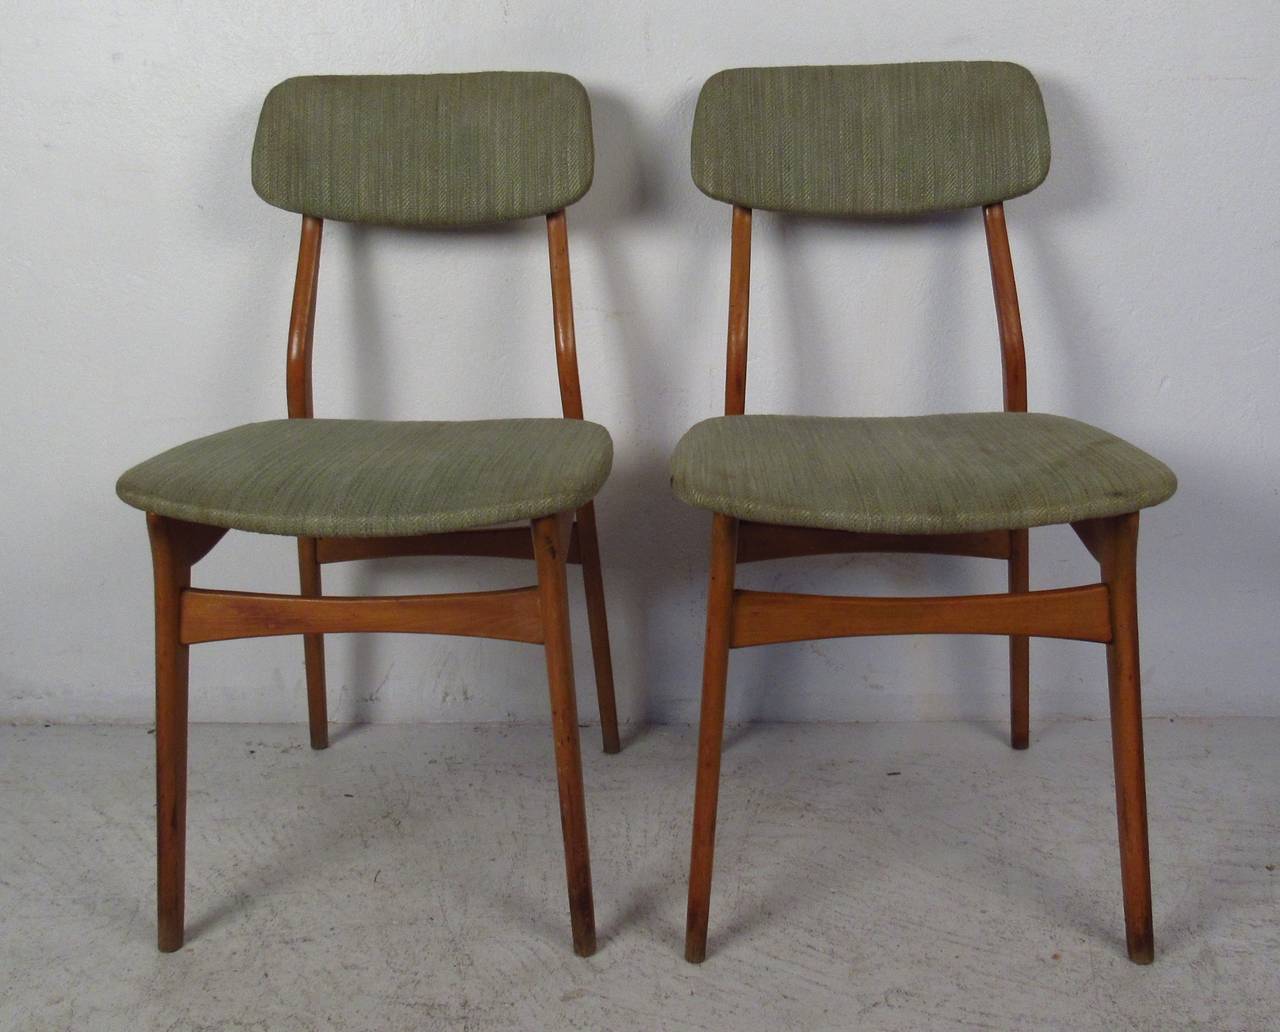 Six vintage modern dining chairs, each featuring upholstered seat and back with sculpted teak frames. A sleek design with floating style back rests, tapered legs, and curved stretchers for added sturdiness. 

Please confirm item location NY or NJ